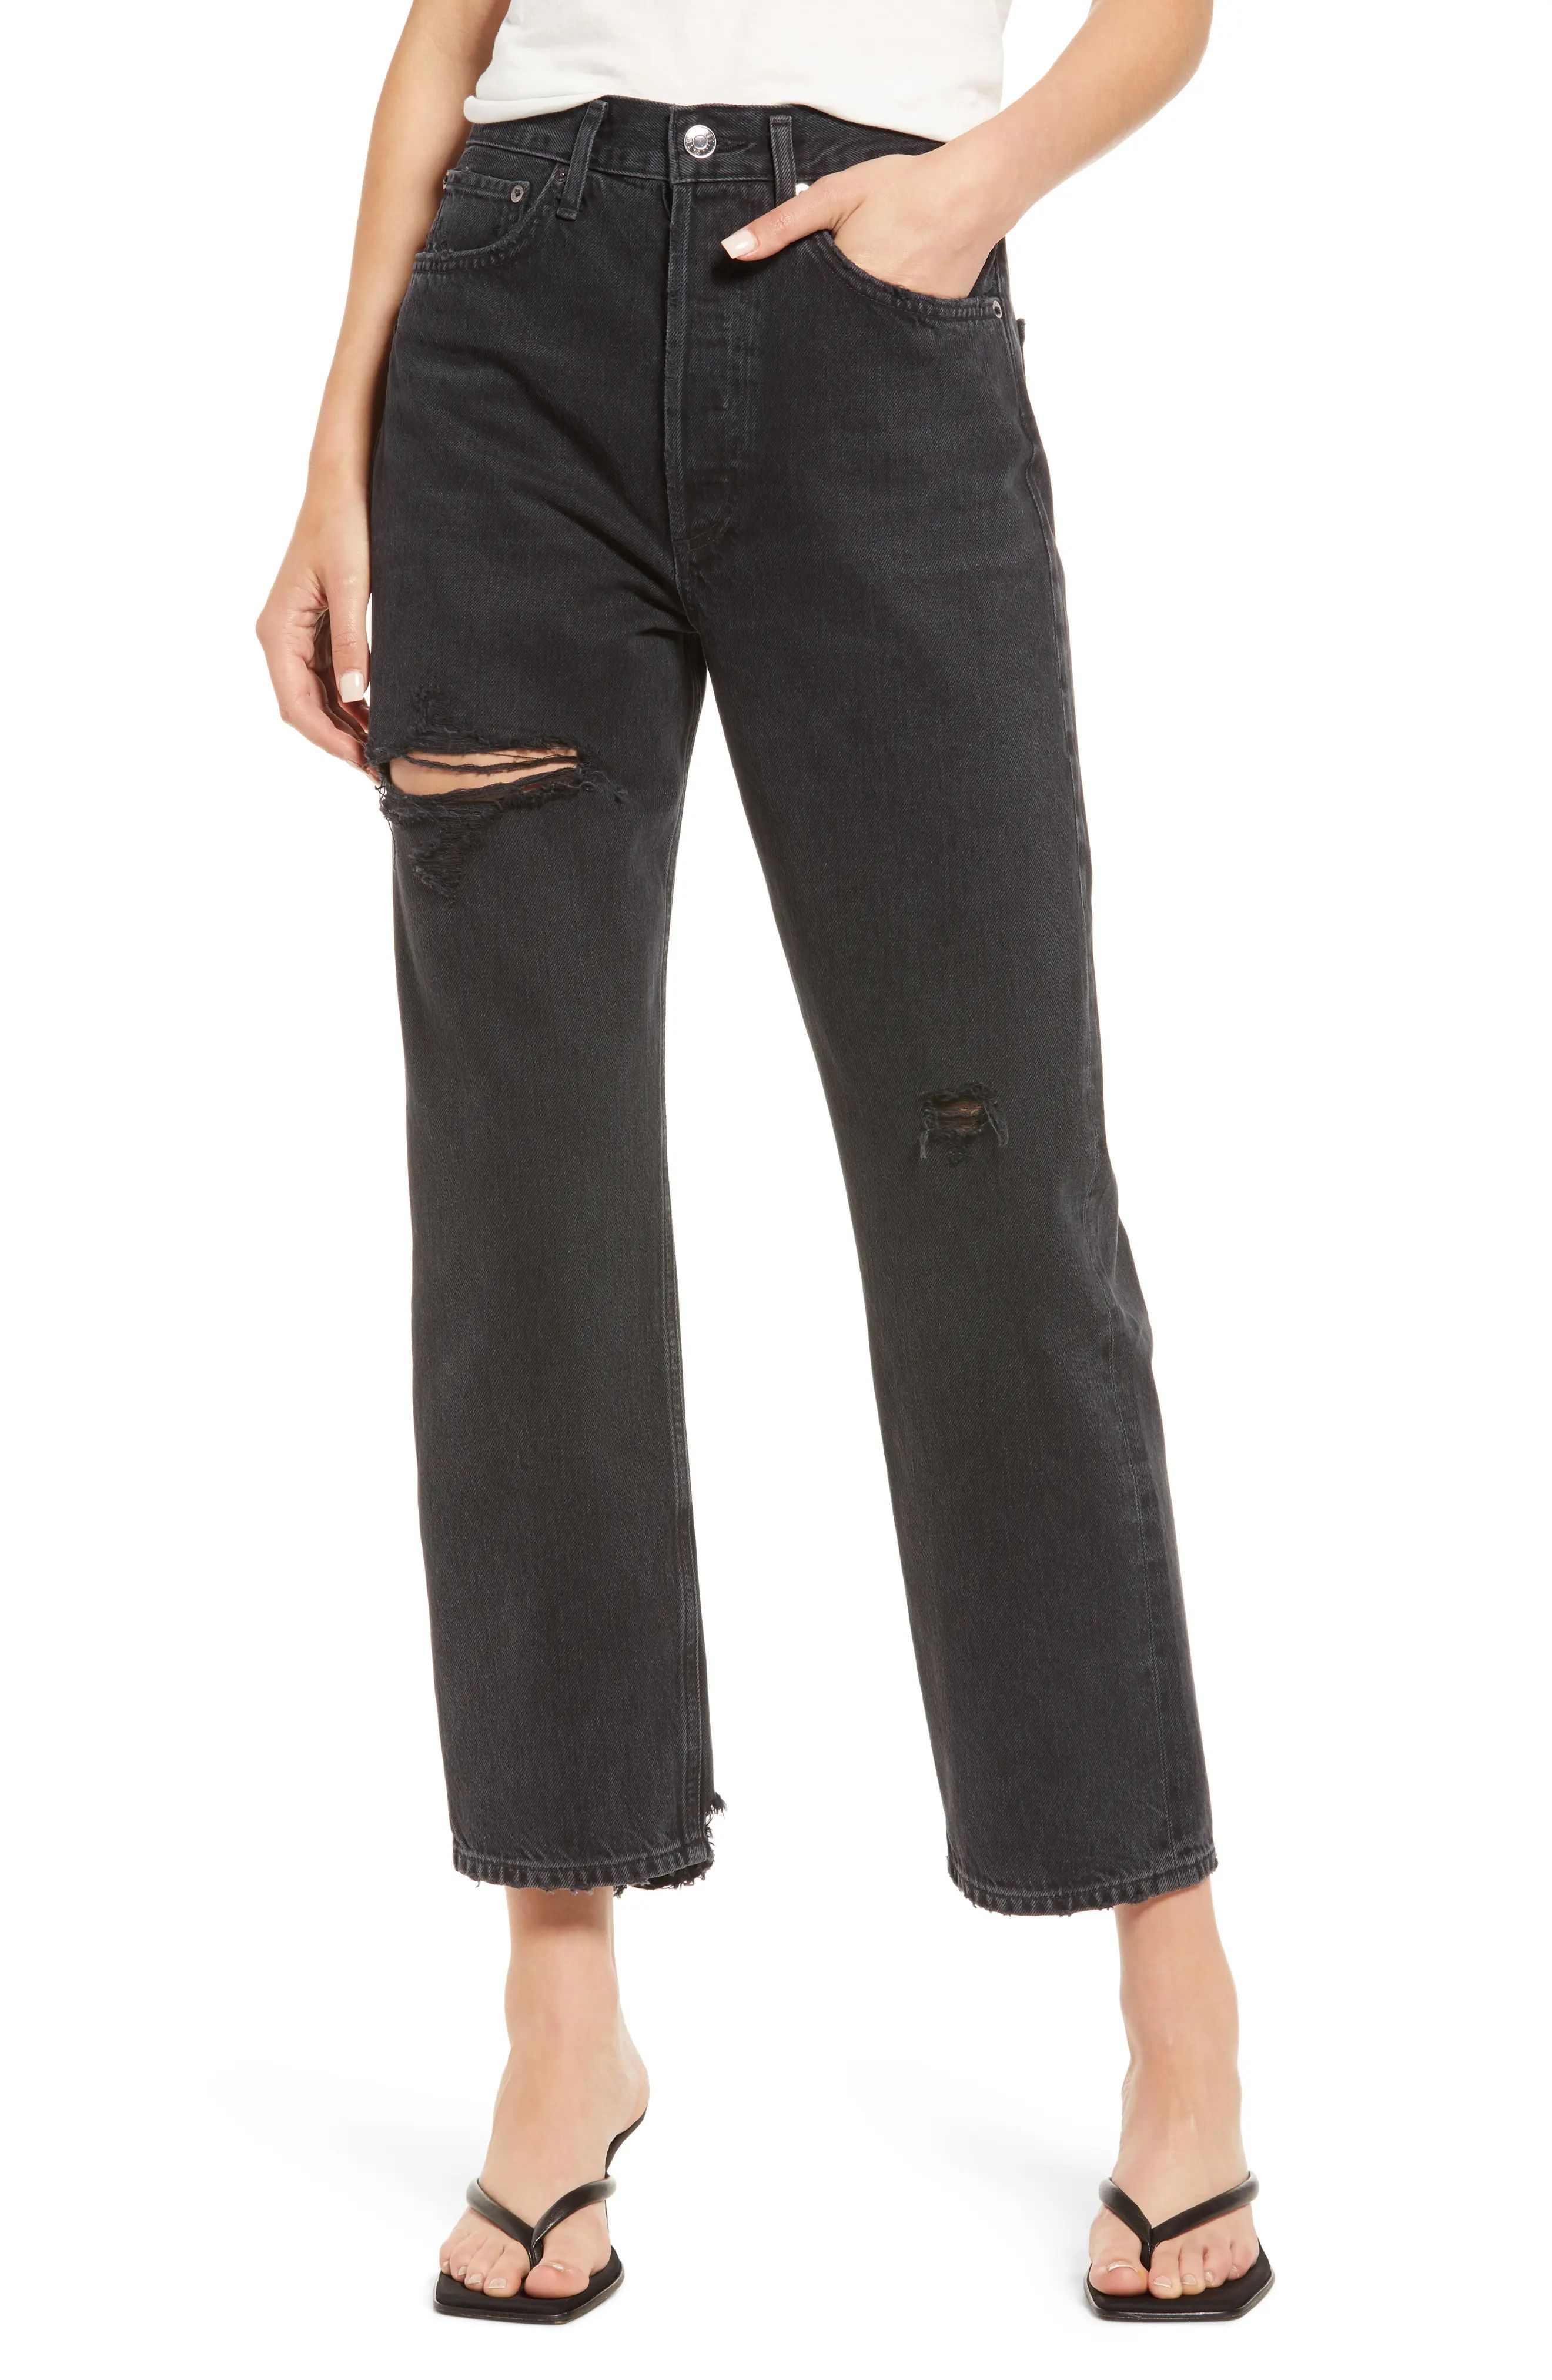 AGOLDE '90s Ripped Super High Waist Crop Straight Leg Jeans in Shutter at Nordstrom, Size 27 | Nordstrom